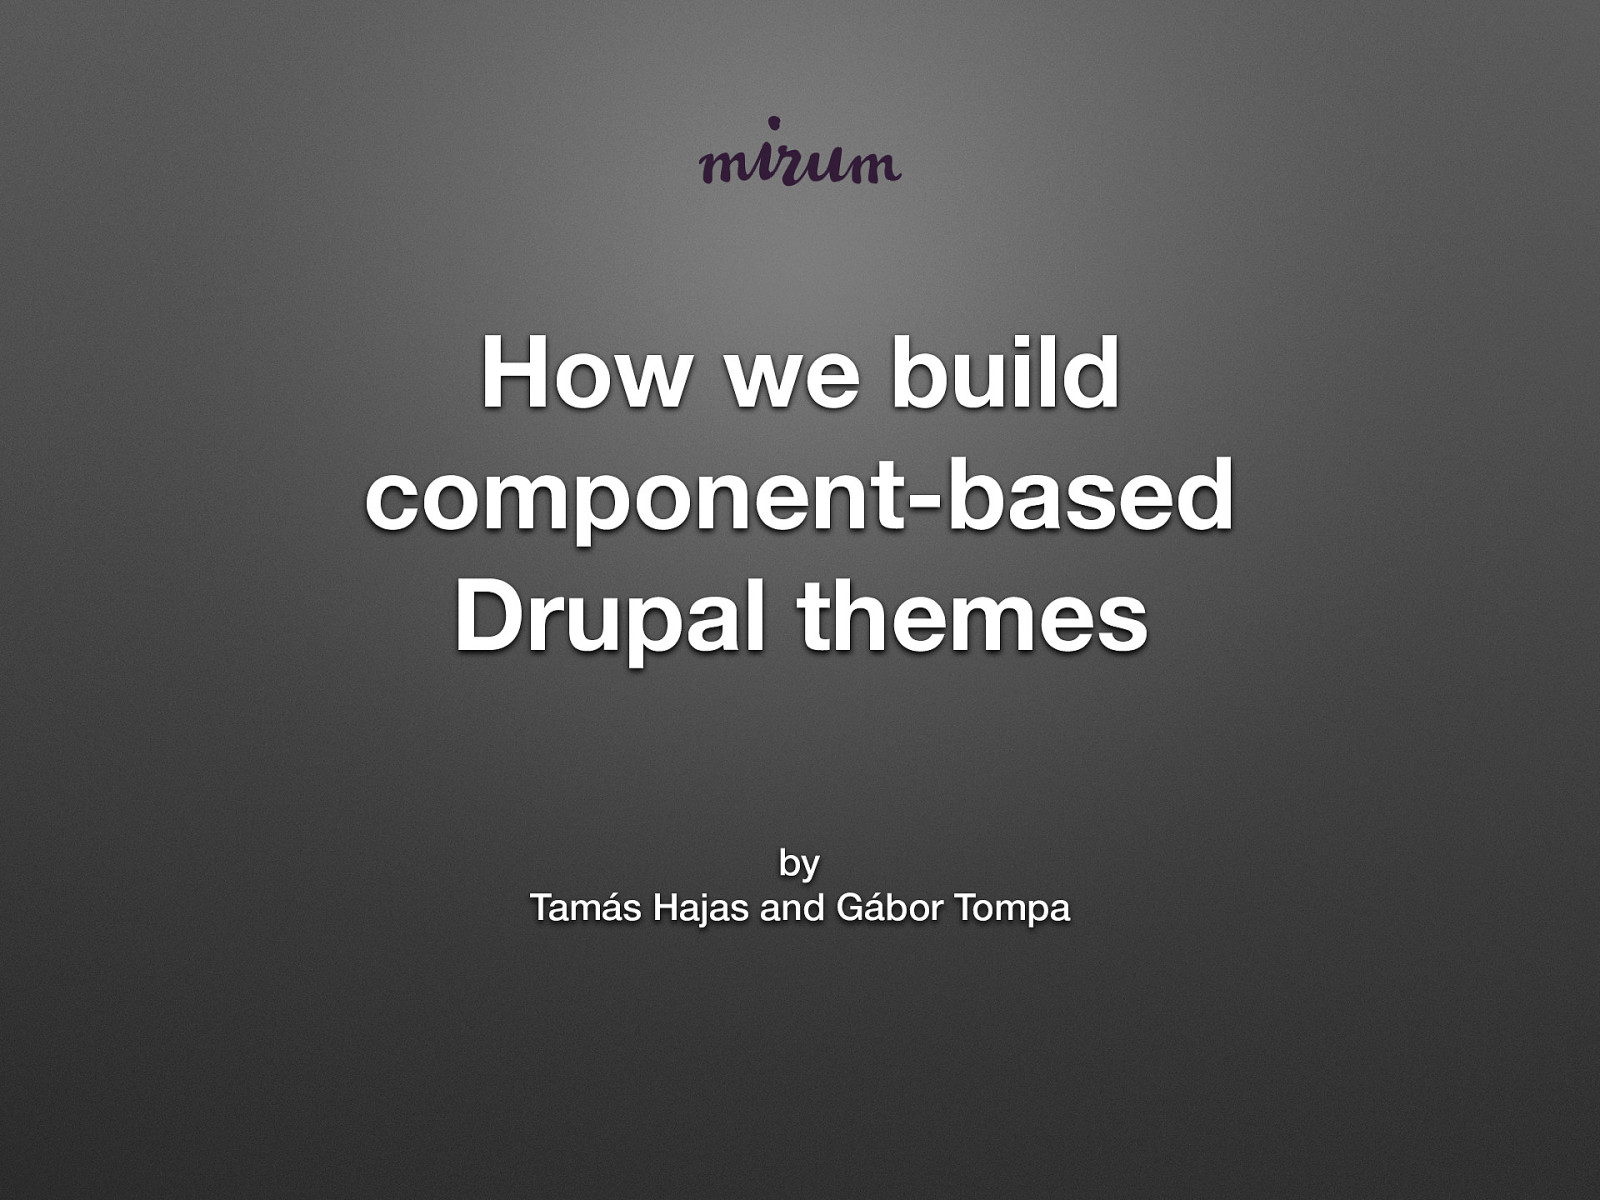 How we build component-based Drupal themes by Tamás Hajas and Gábor Tompa